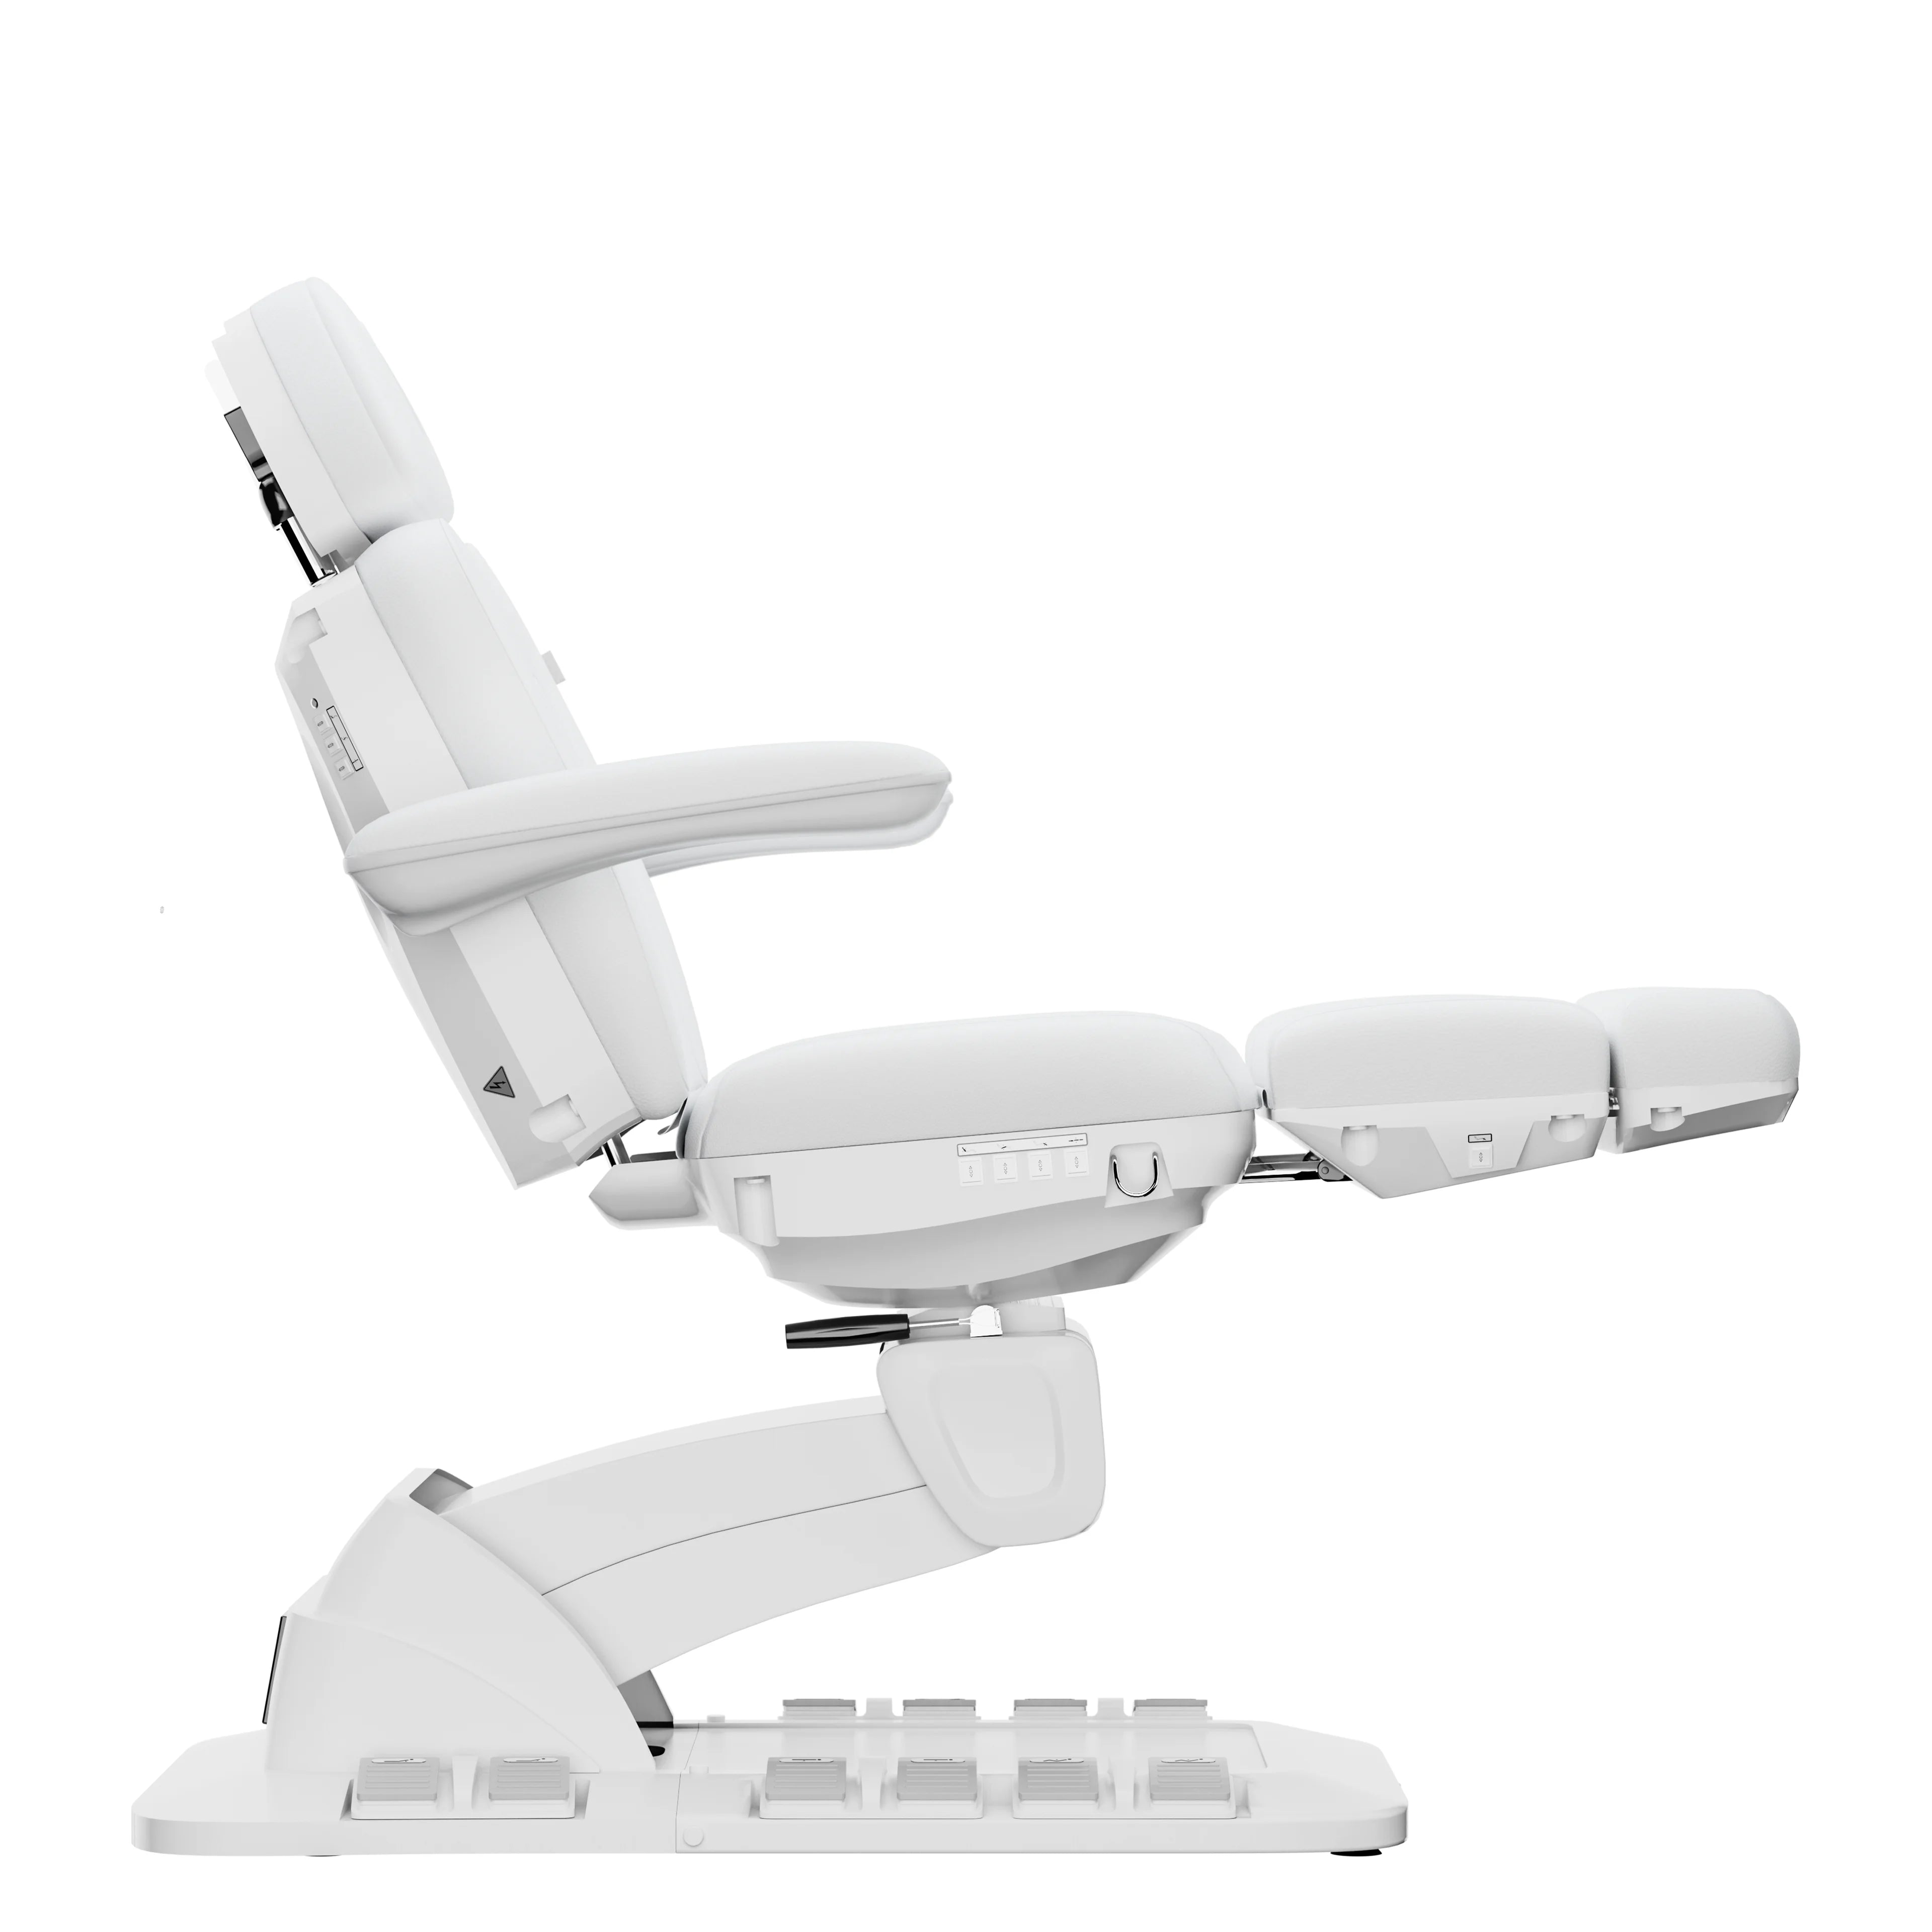 SpaMarc . Novato (White) . Rotating . 4 Motor Spa Treatment Chair/Bed